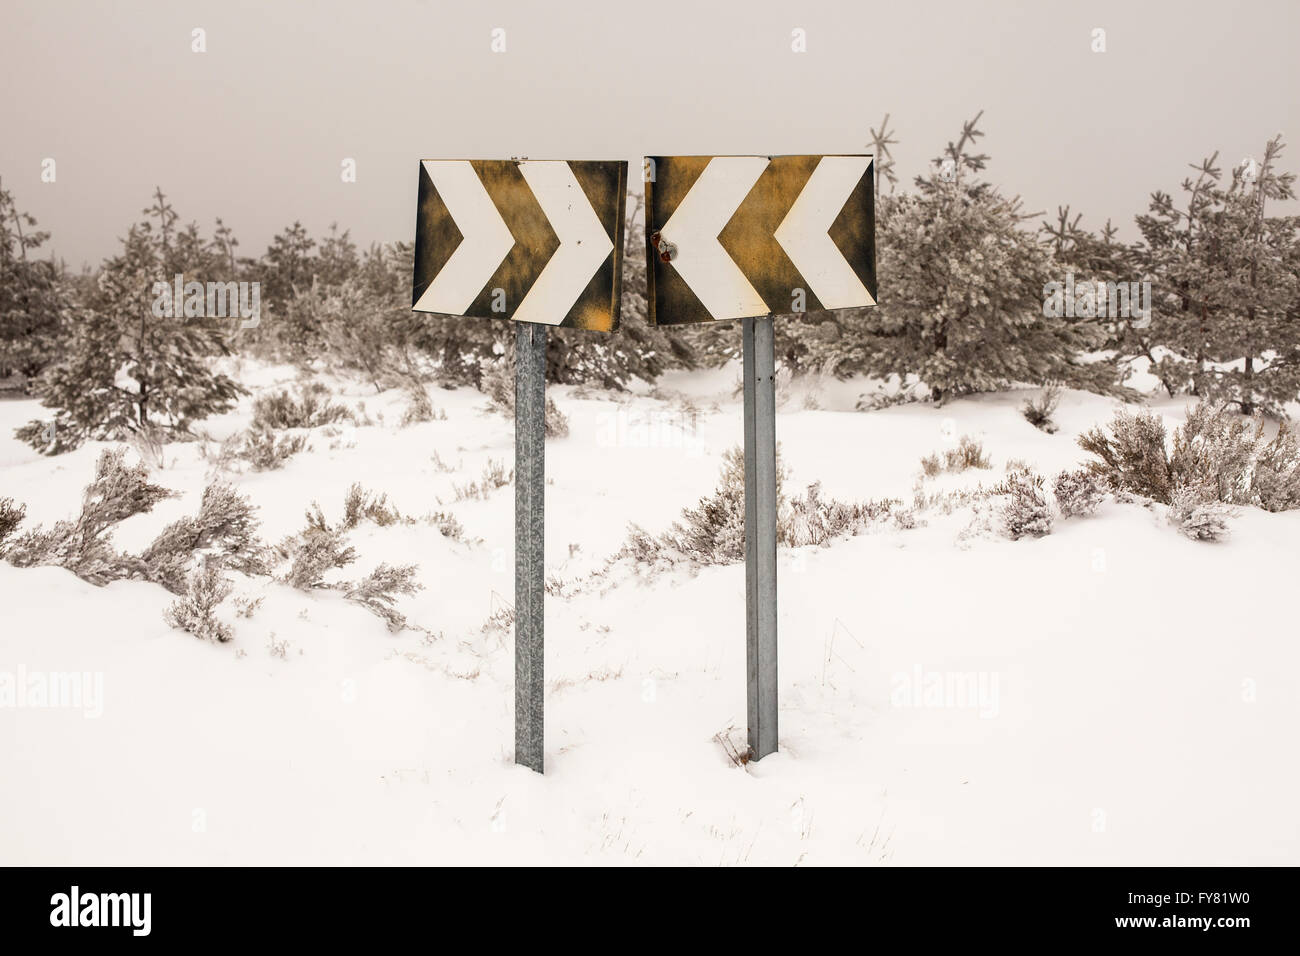 double traffic signal in a snowed mountain landscape Stock Photo